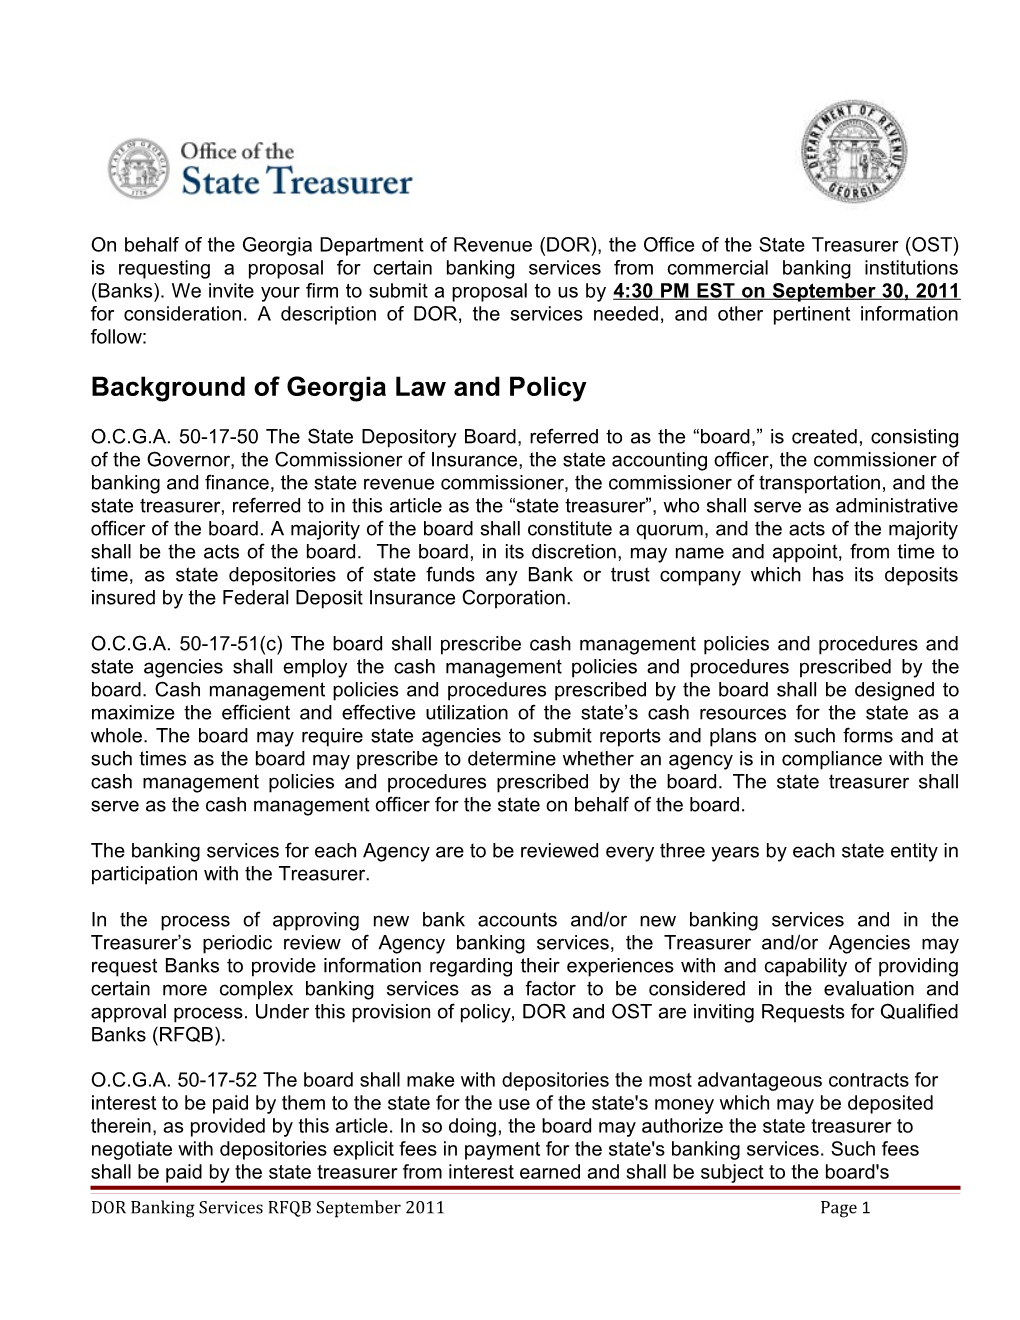 Background of Georgia Law and Policy